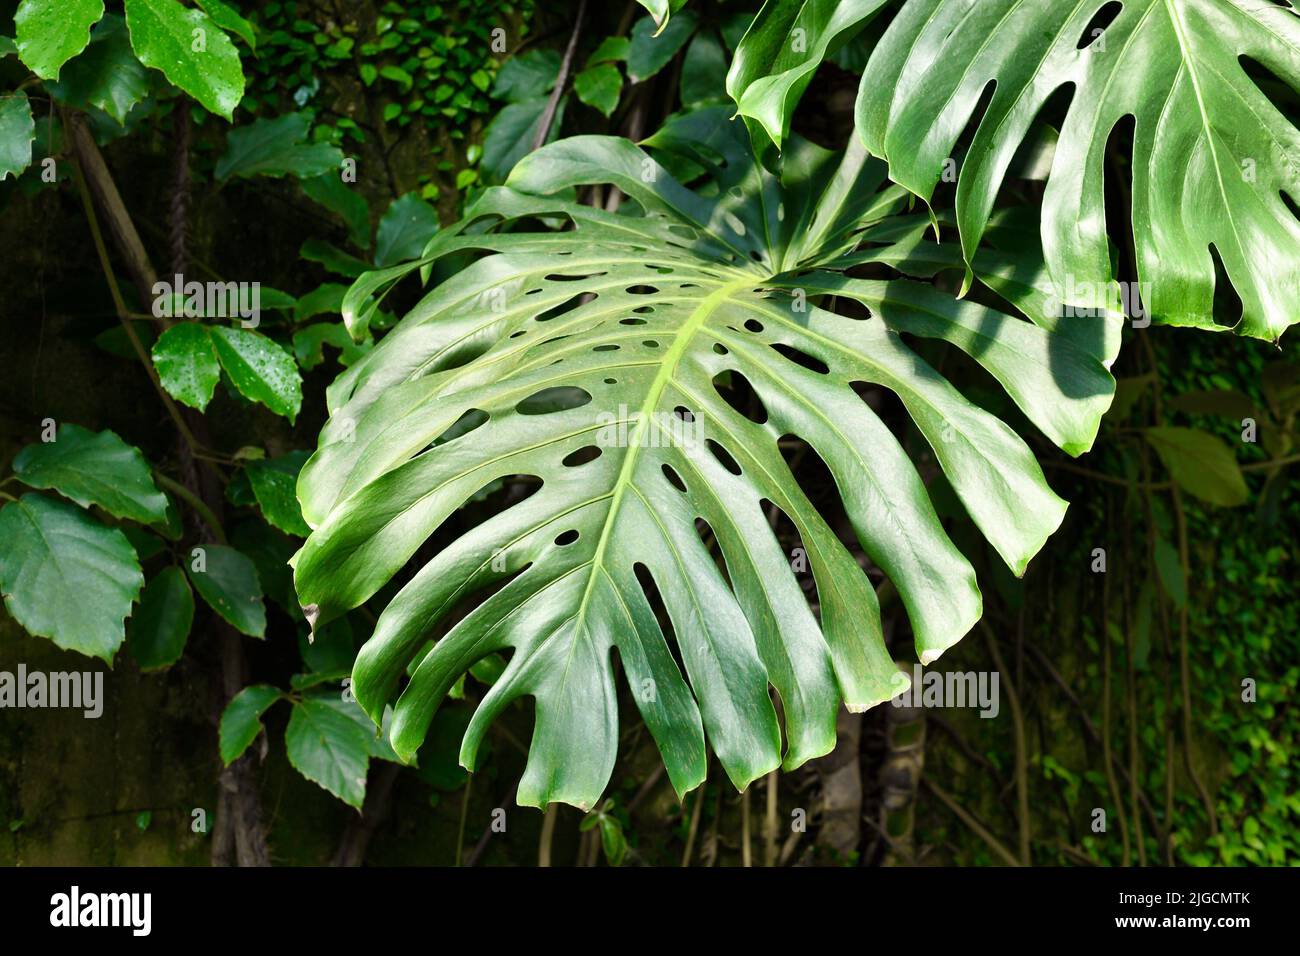 Mature leaf of tropical 'Monstera Deliciosa' houseplant with fenestration and holes Stock Photo